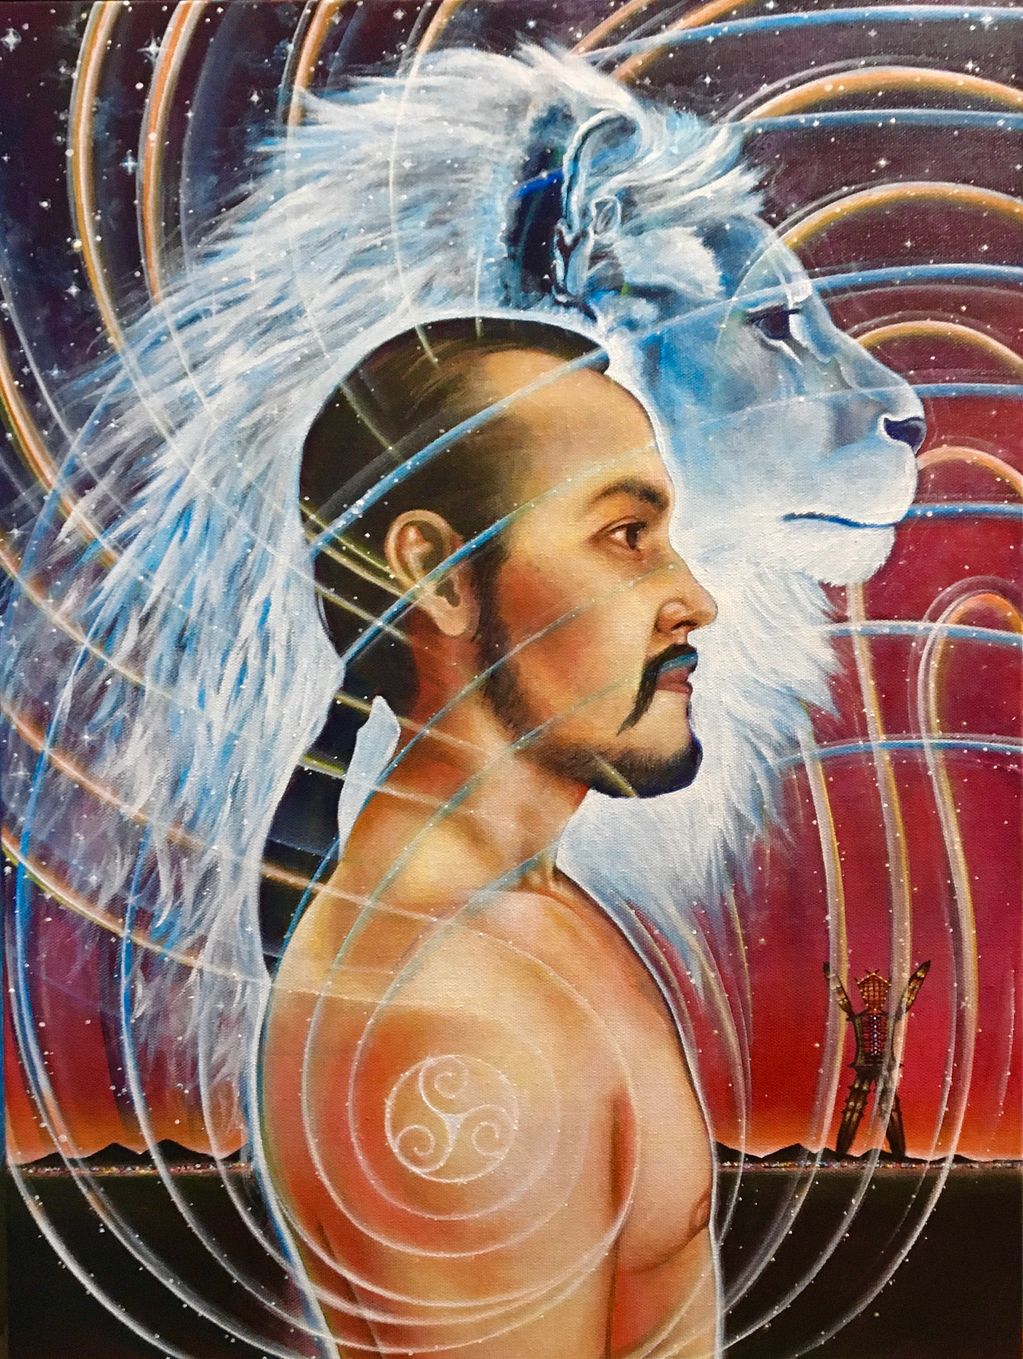 Man with beard and ponytail surrounded by blue lion spirit in desert, burning man